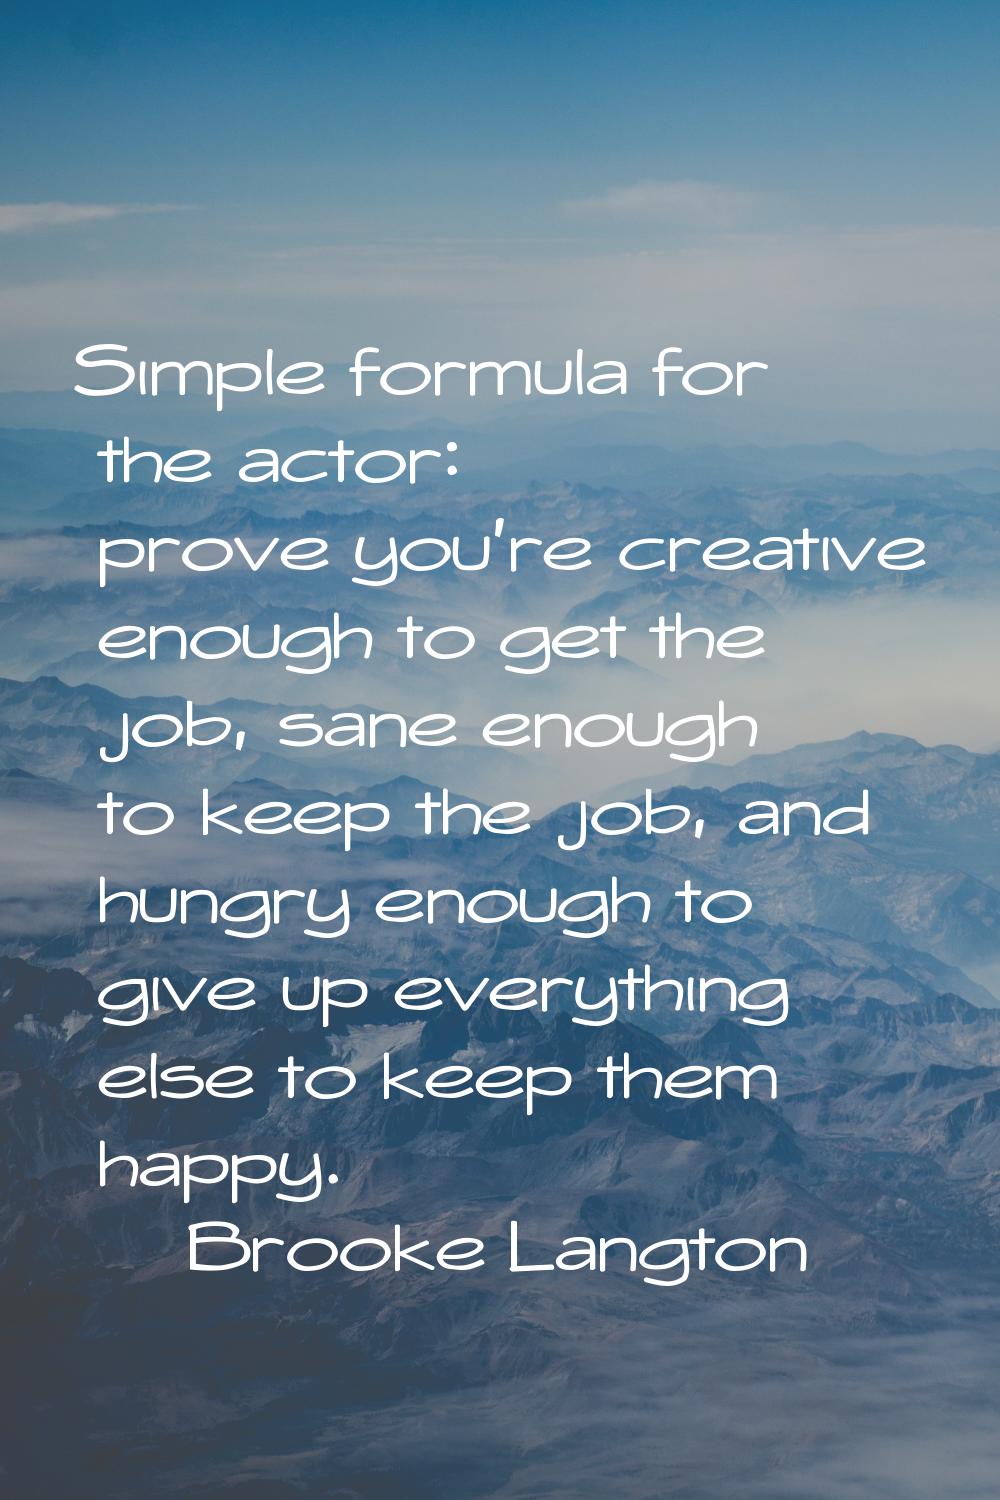 Simple formula for the actor: prove you're creative enough to get the job, sane enough to keep the 